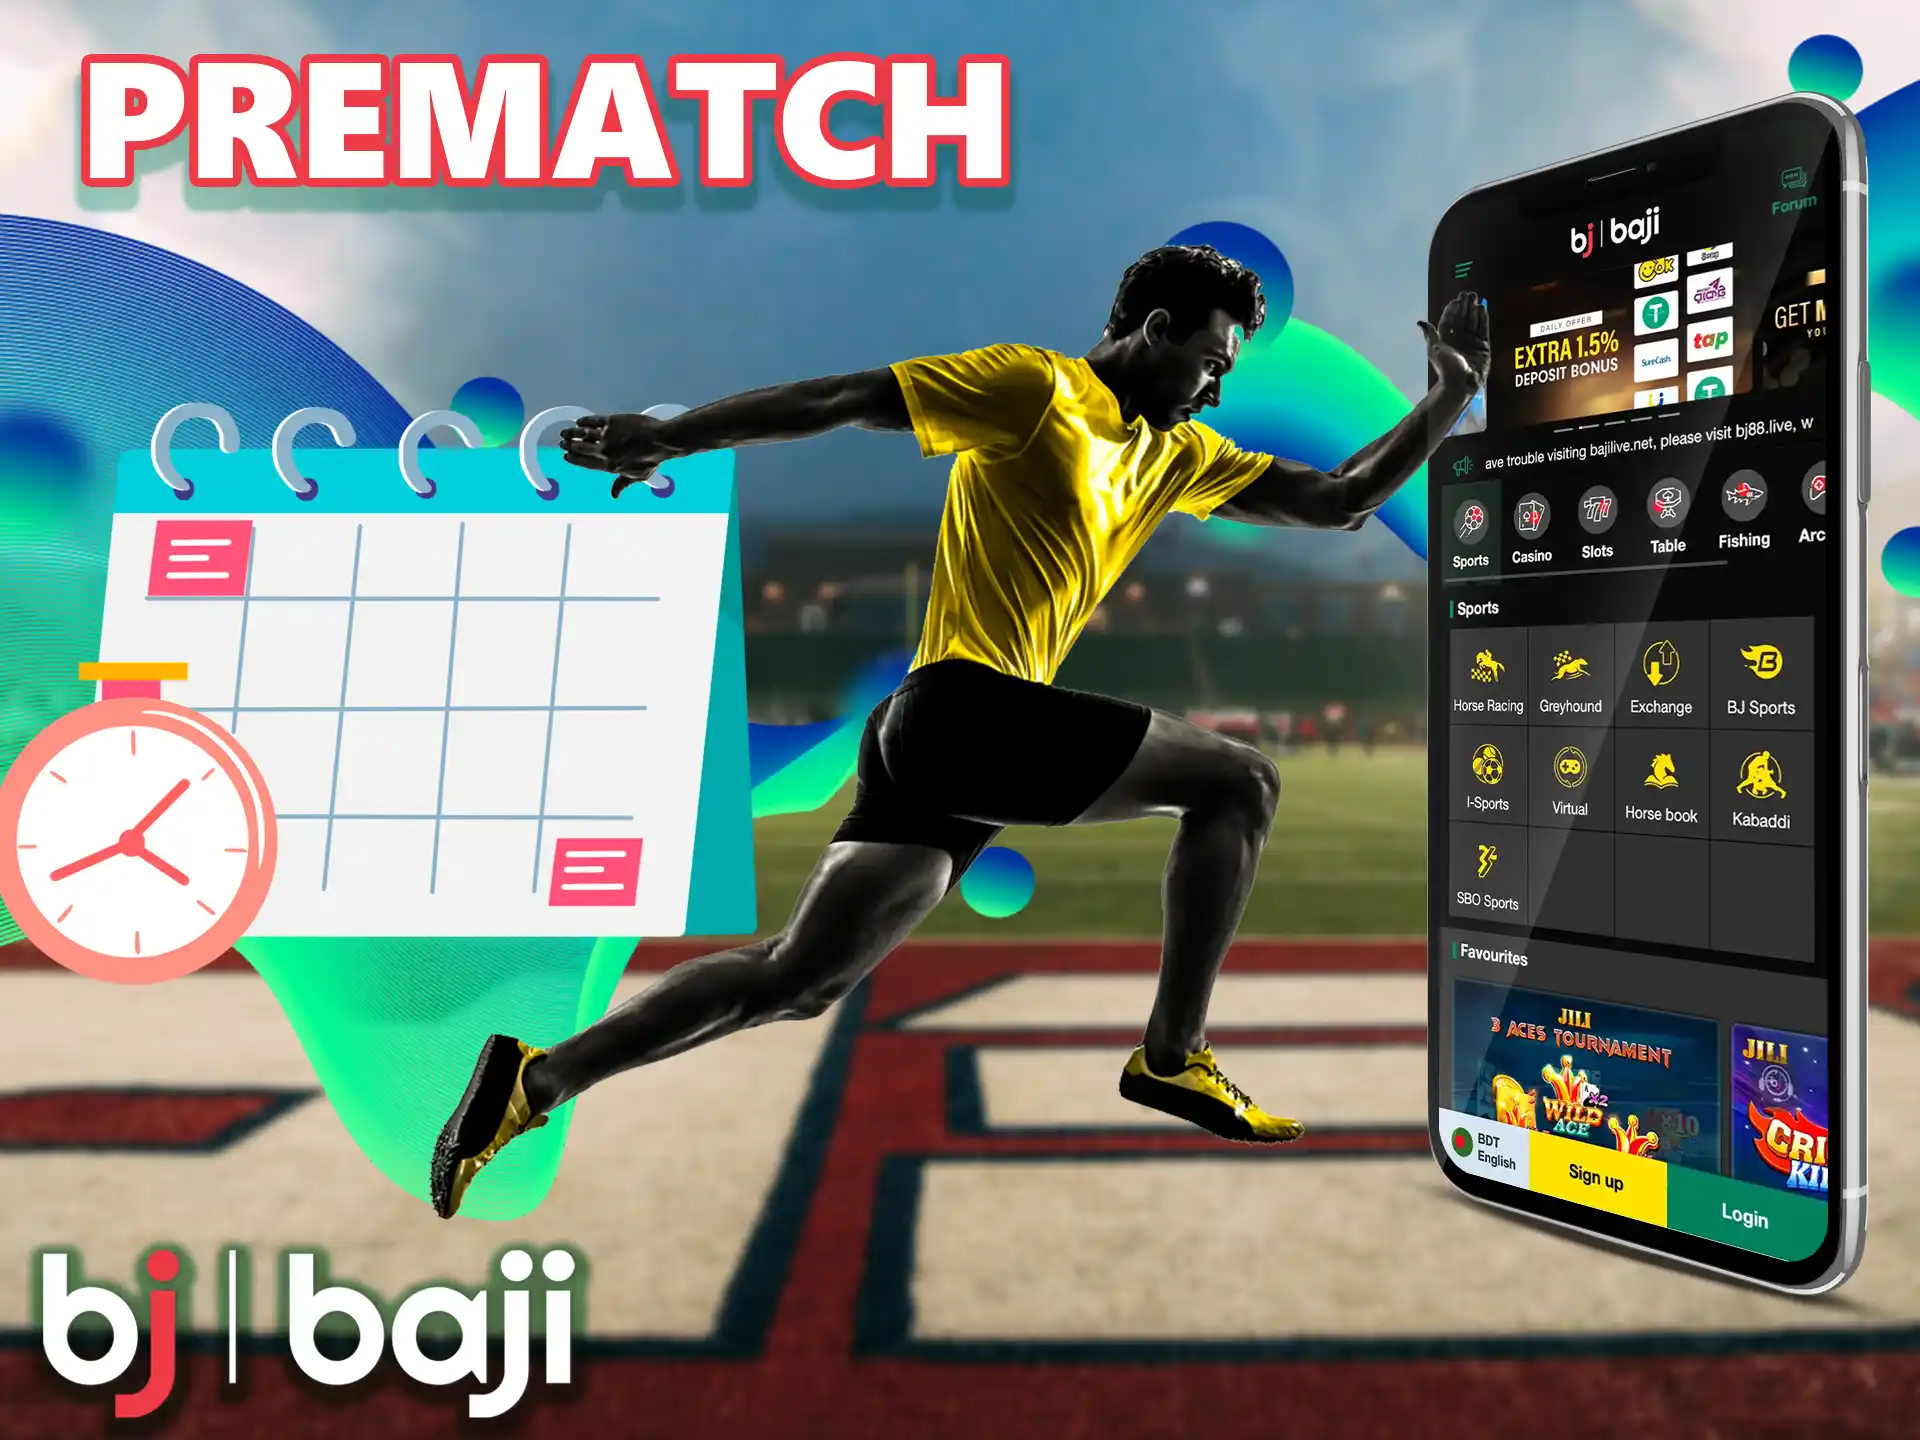 This type of betting in Baji is safer and allows players to analyze the outcome of the future bet, for beginners this option is the most preferable.